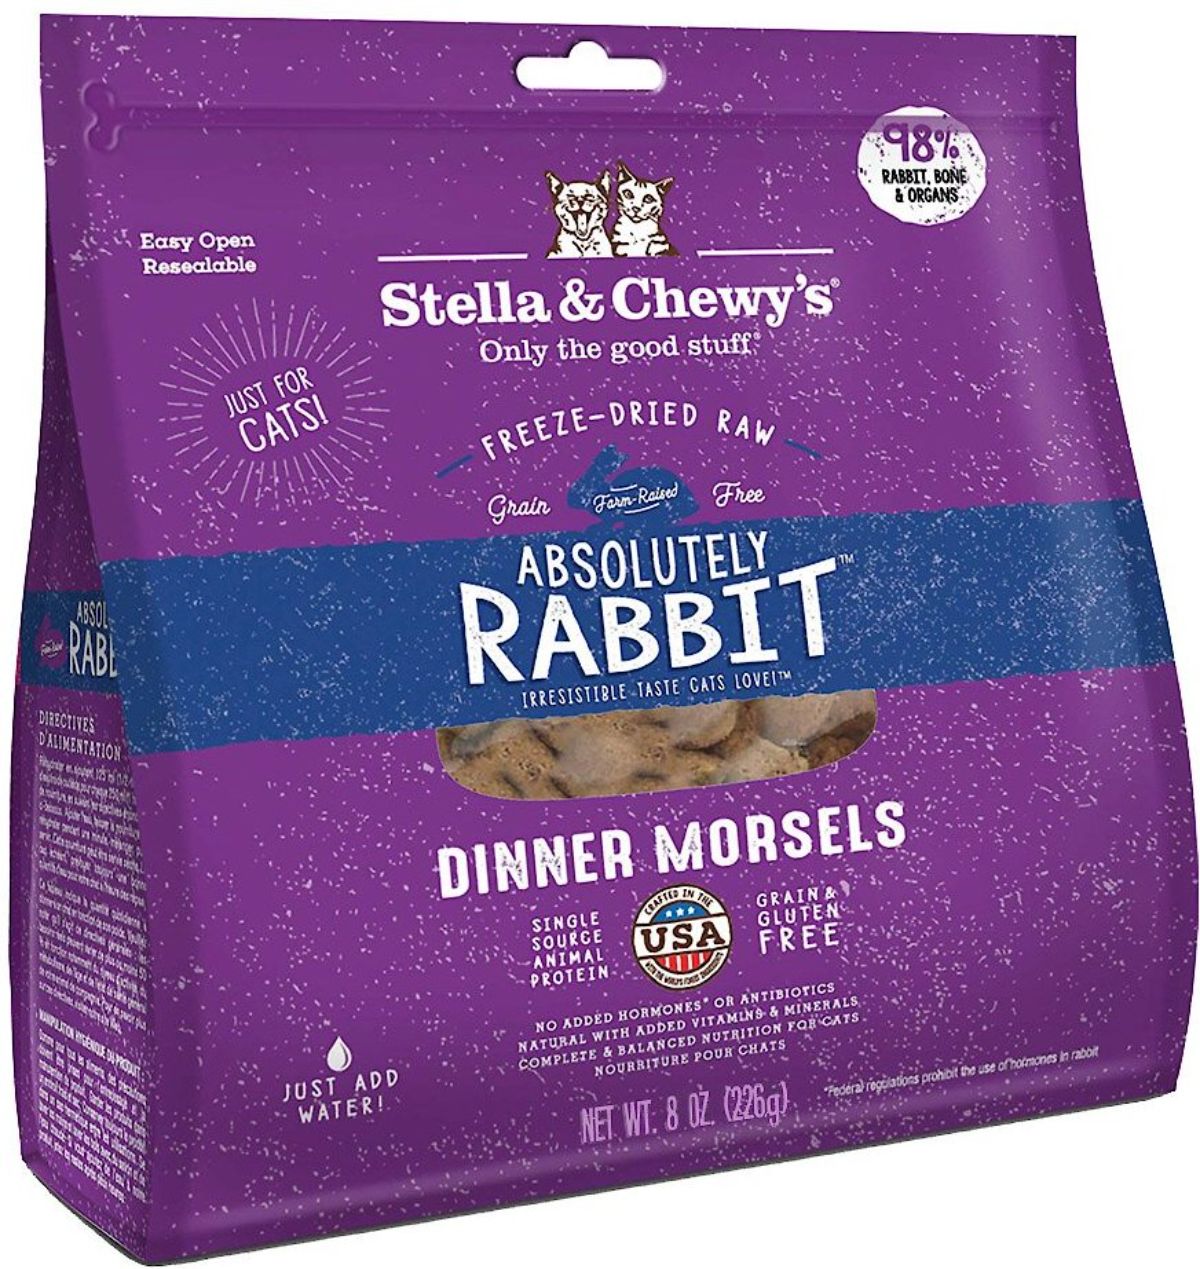 Stella & Chewy’s Absolutely Rabbit Dinner Morsels